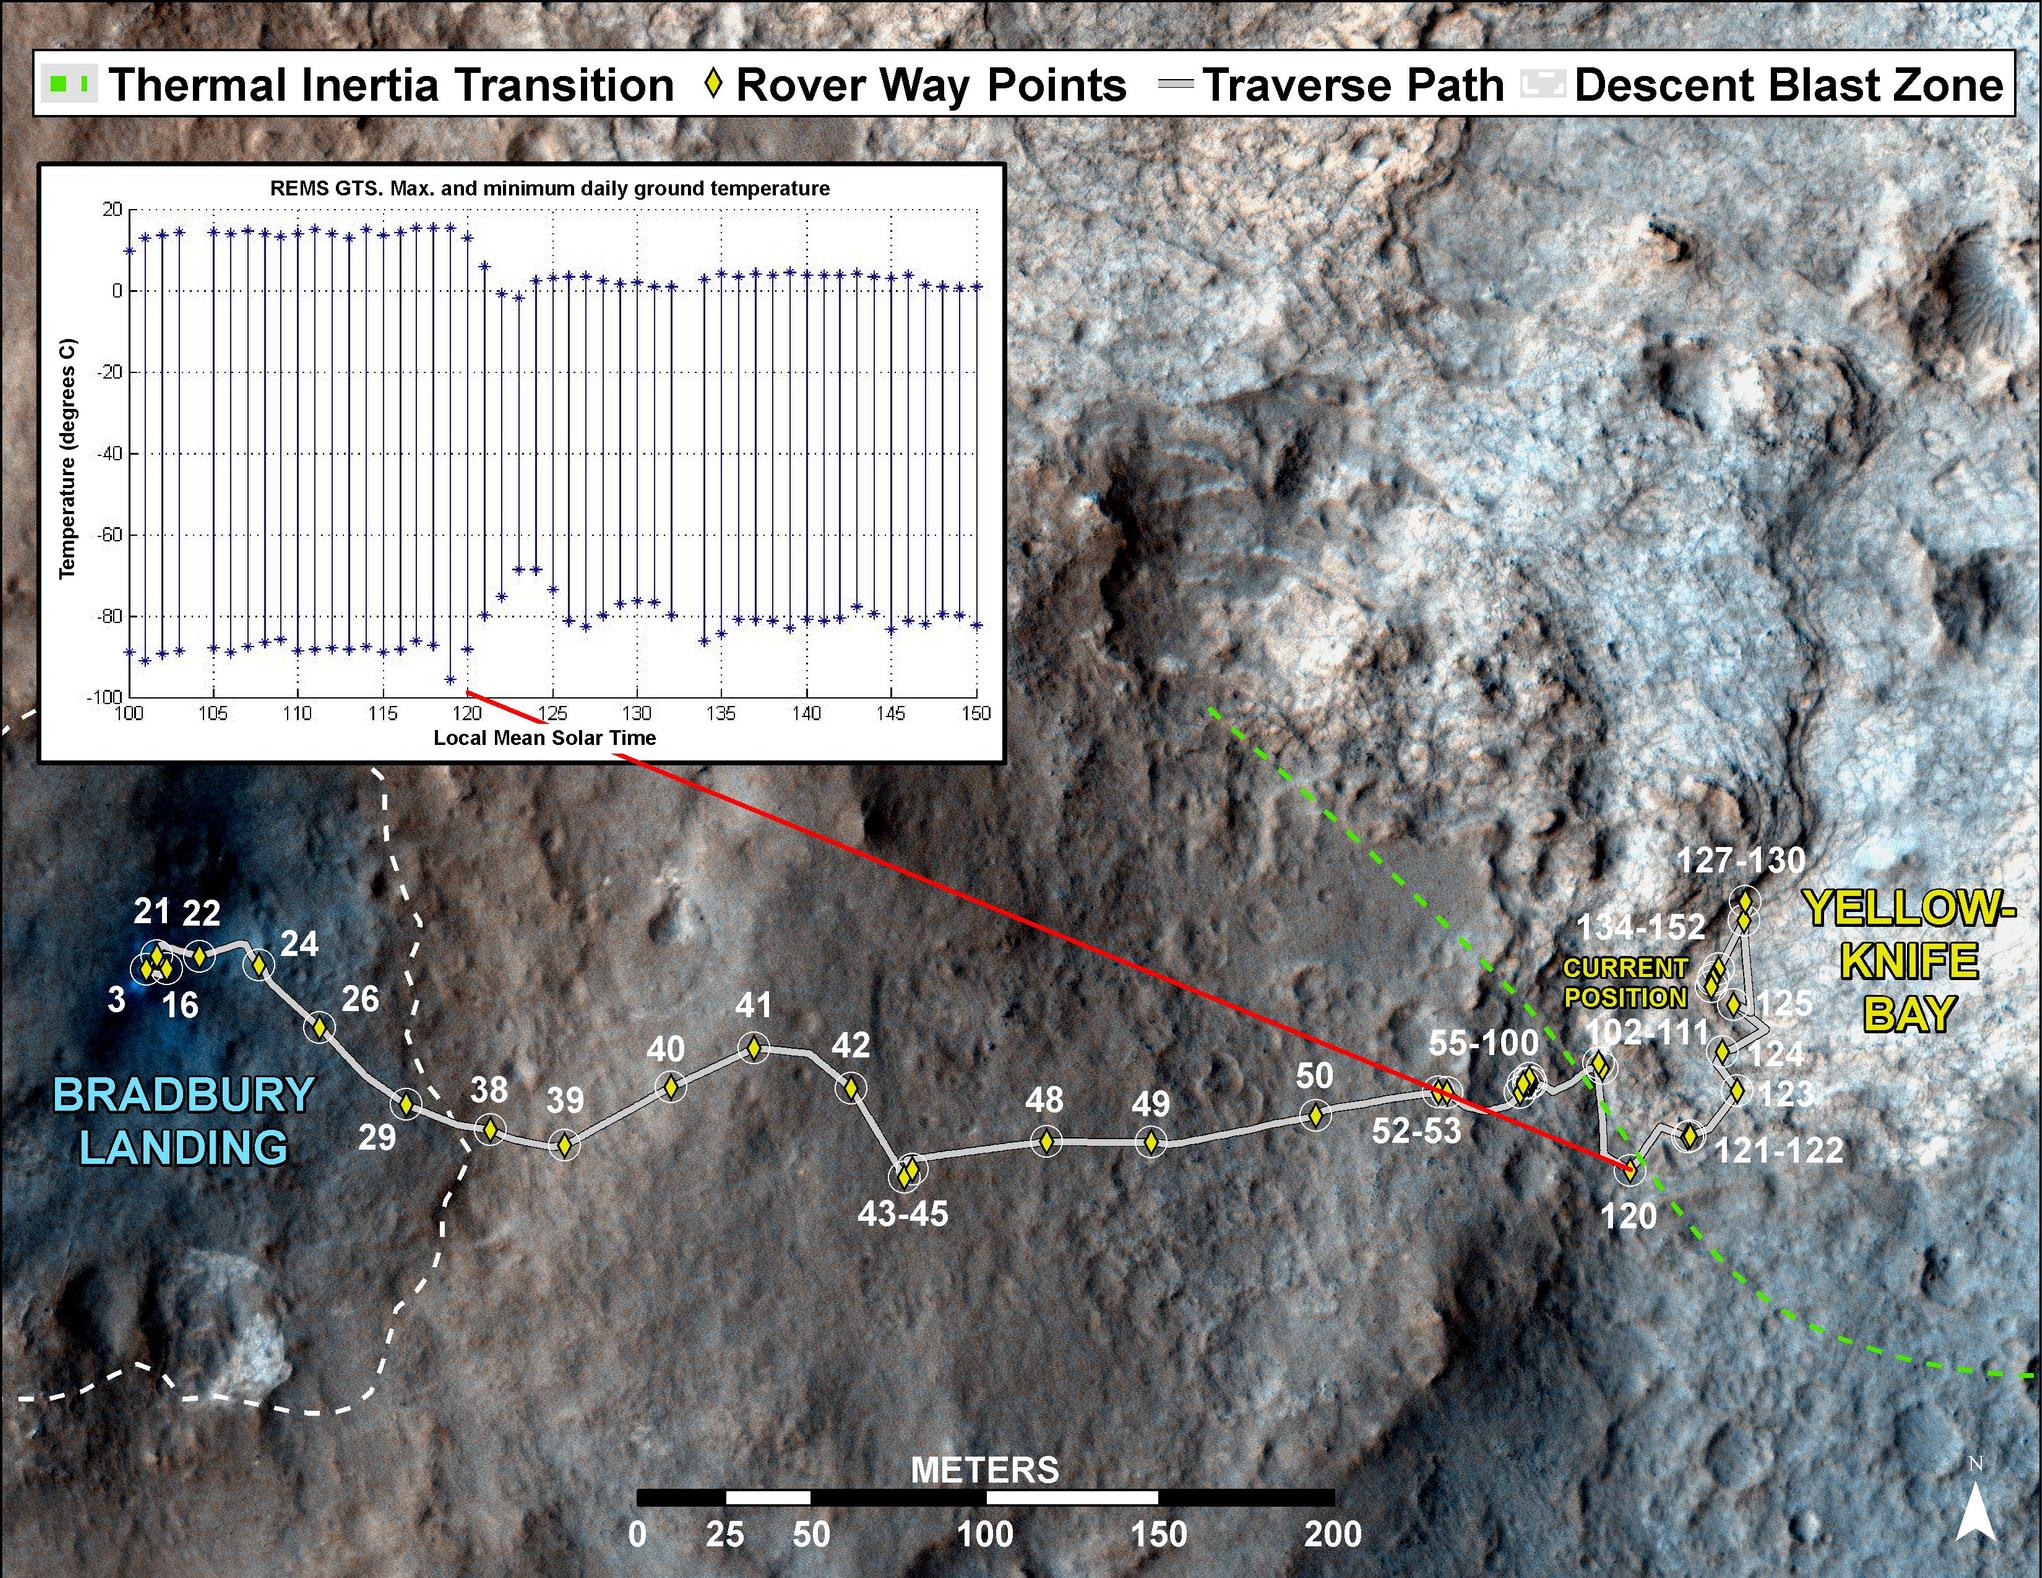 This image maps the traverse of NASA's Mars rover Curiosity from "Bradbury Landing" to "Yellowknife Bay," with an inset documenting a change in the ground's thermal properties with arrival at a different type of terrain.